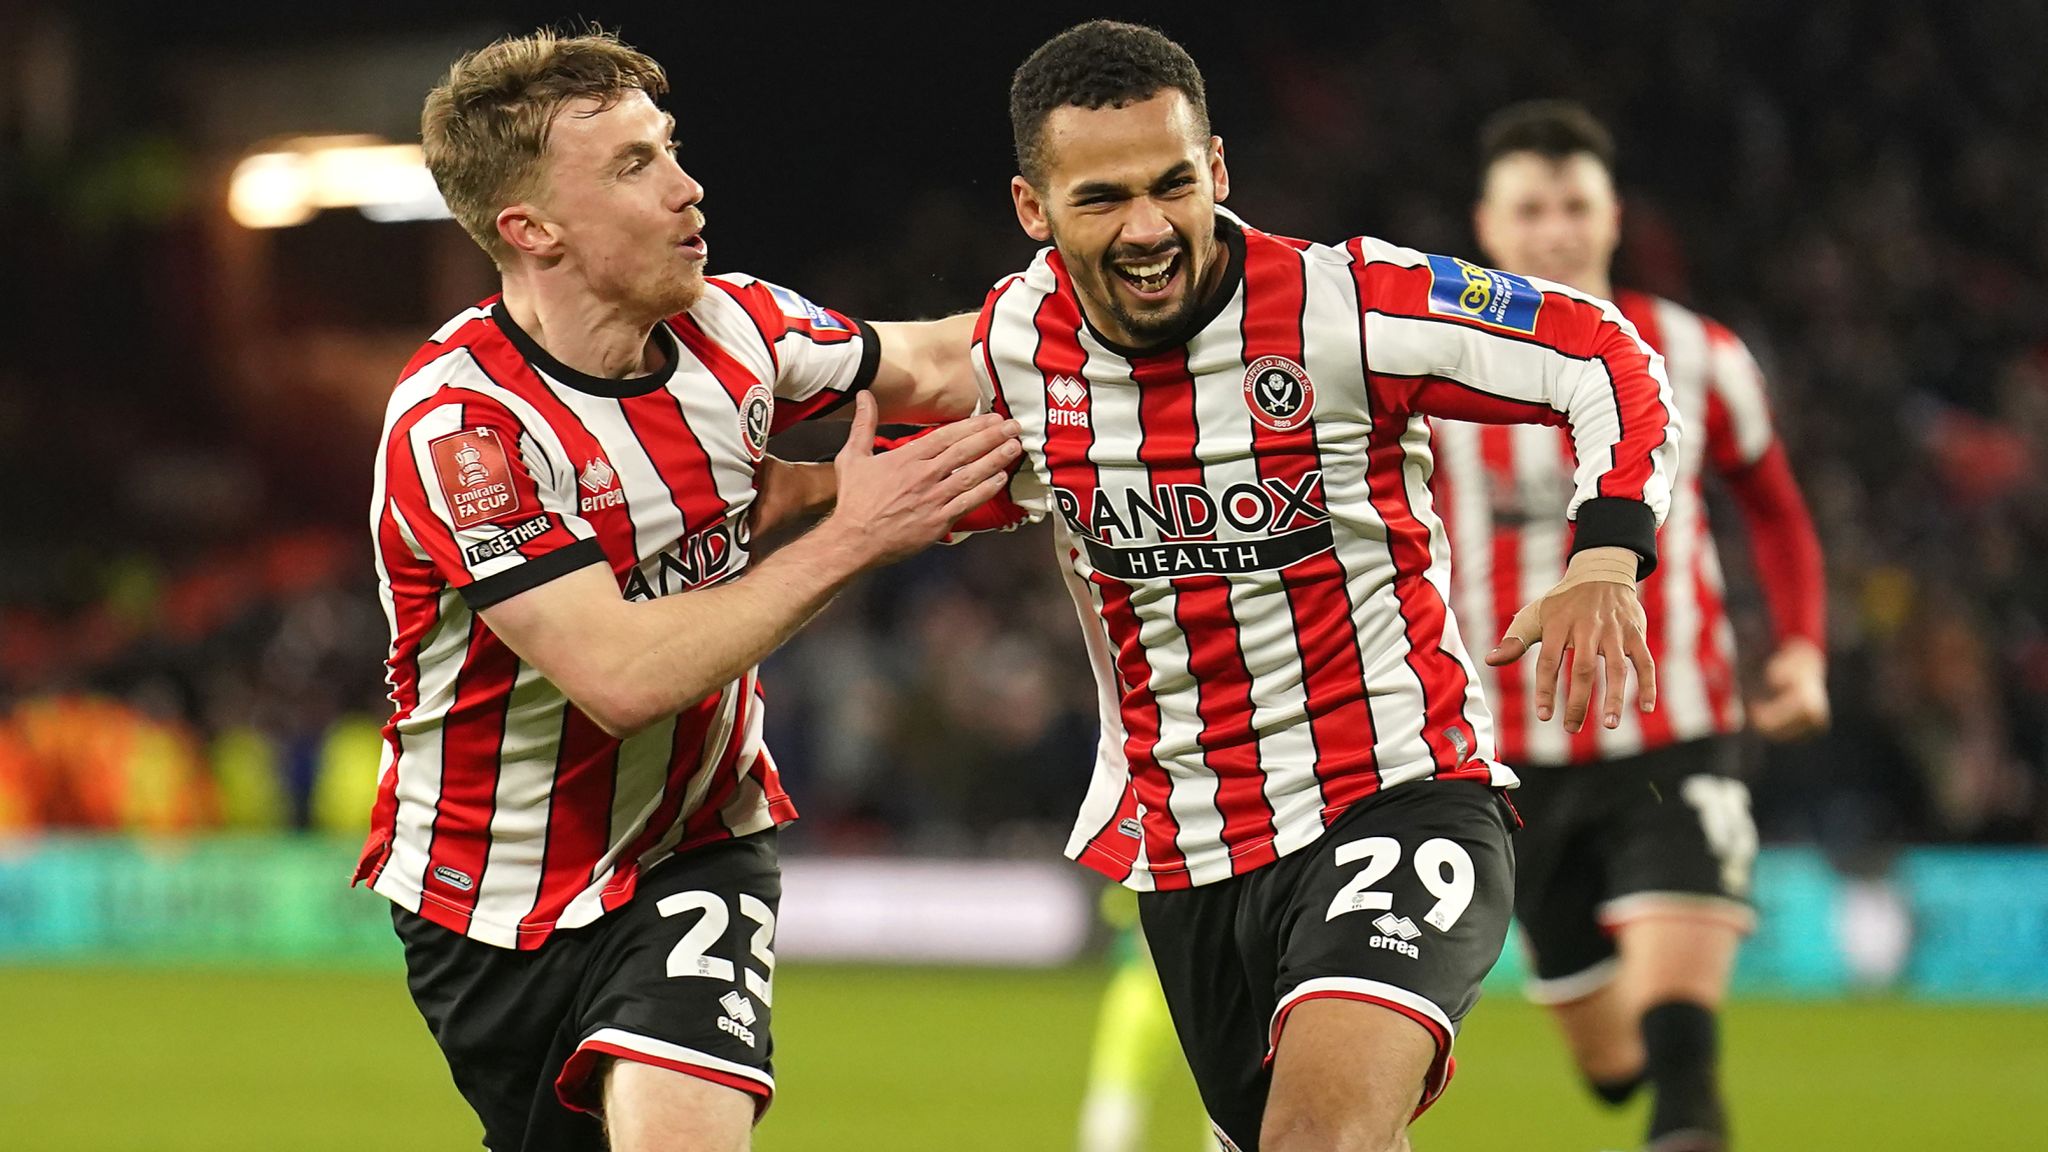 Tottenham vs Sheffield United Live Stream: How To Watch For Free